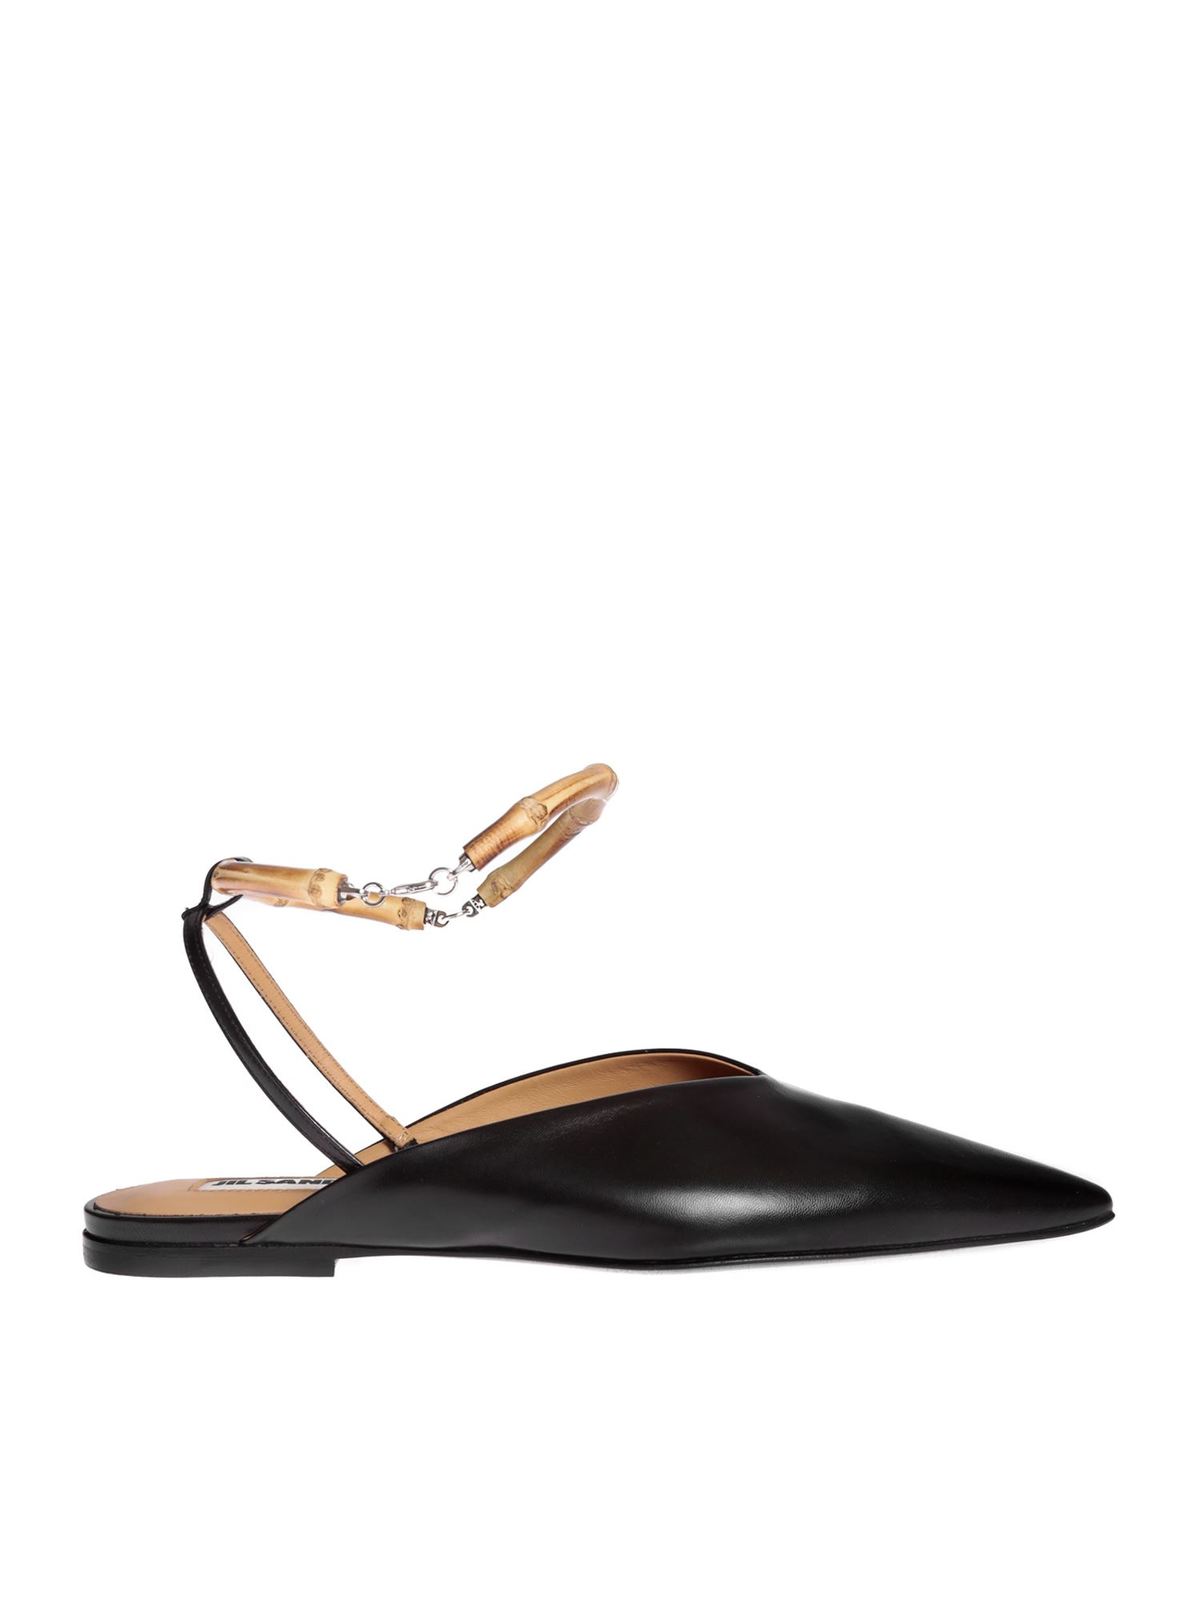 Mules shoes Jil Sander - Pointed black ballerinas with bamboo